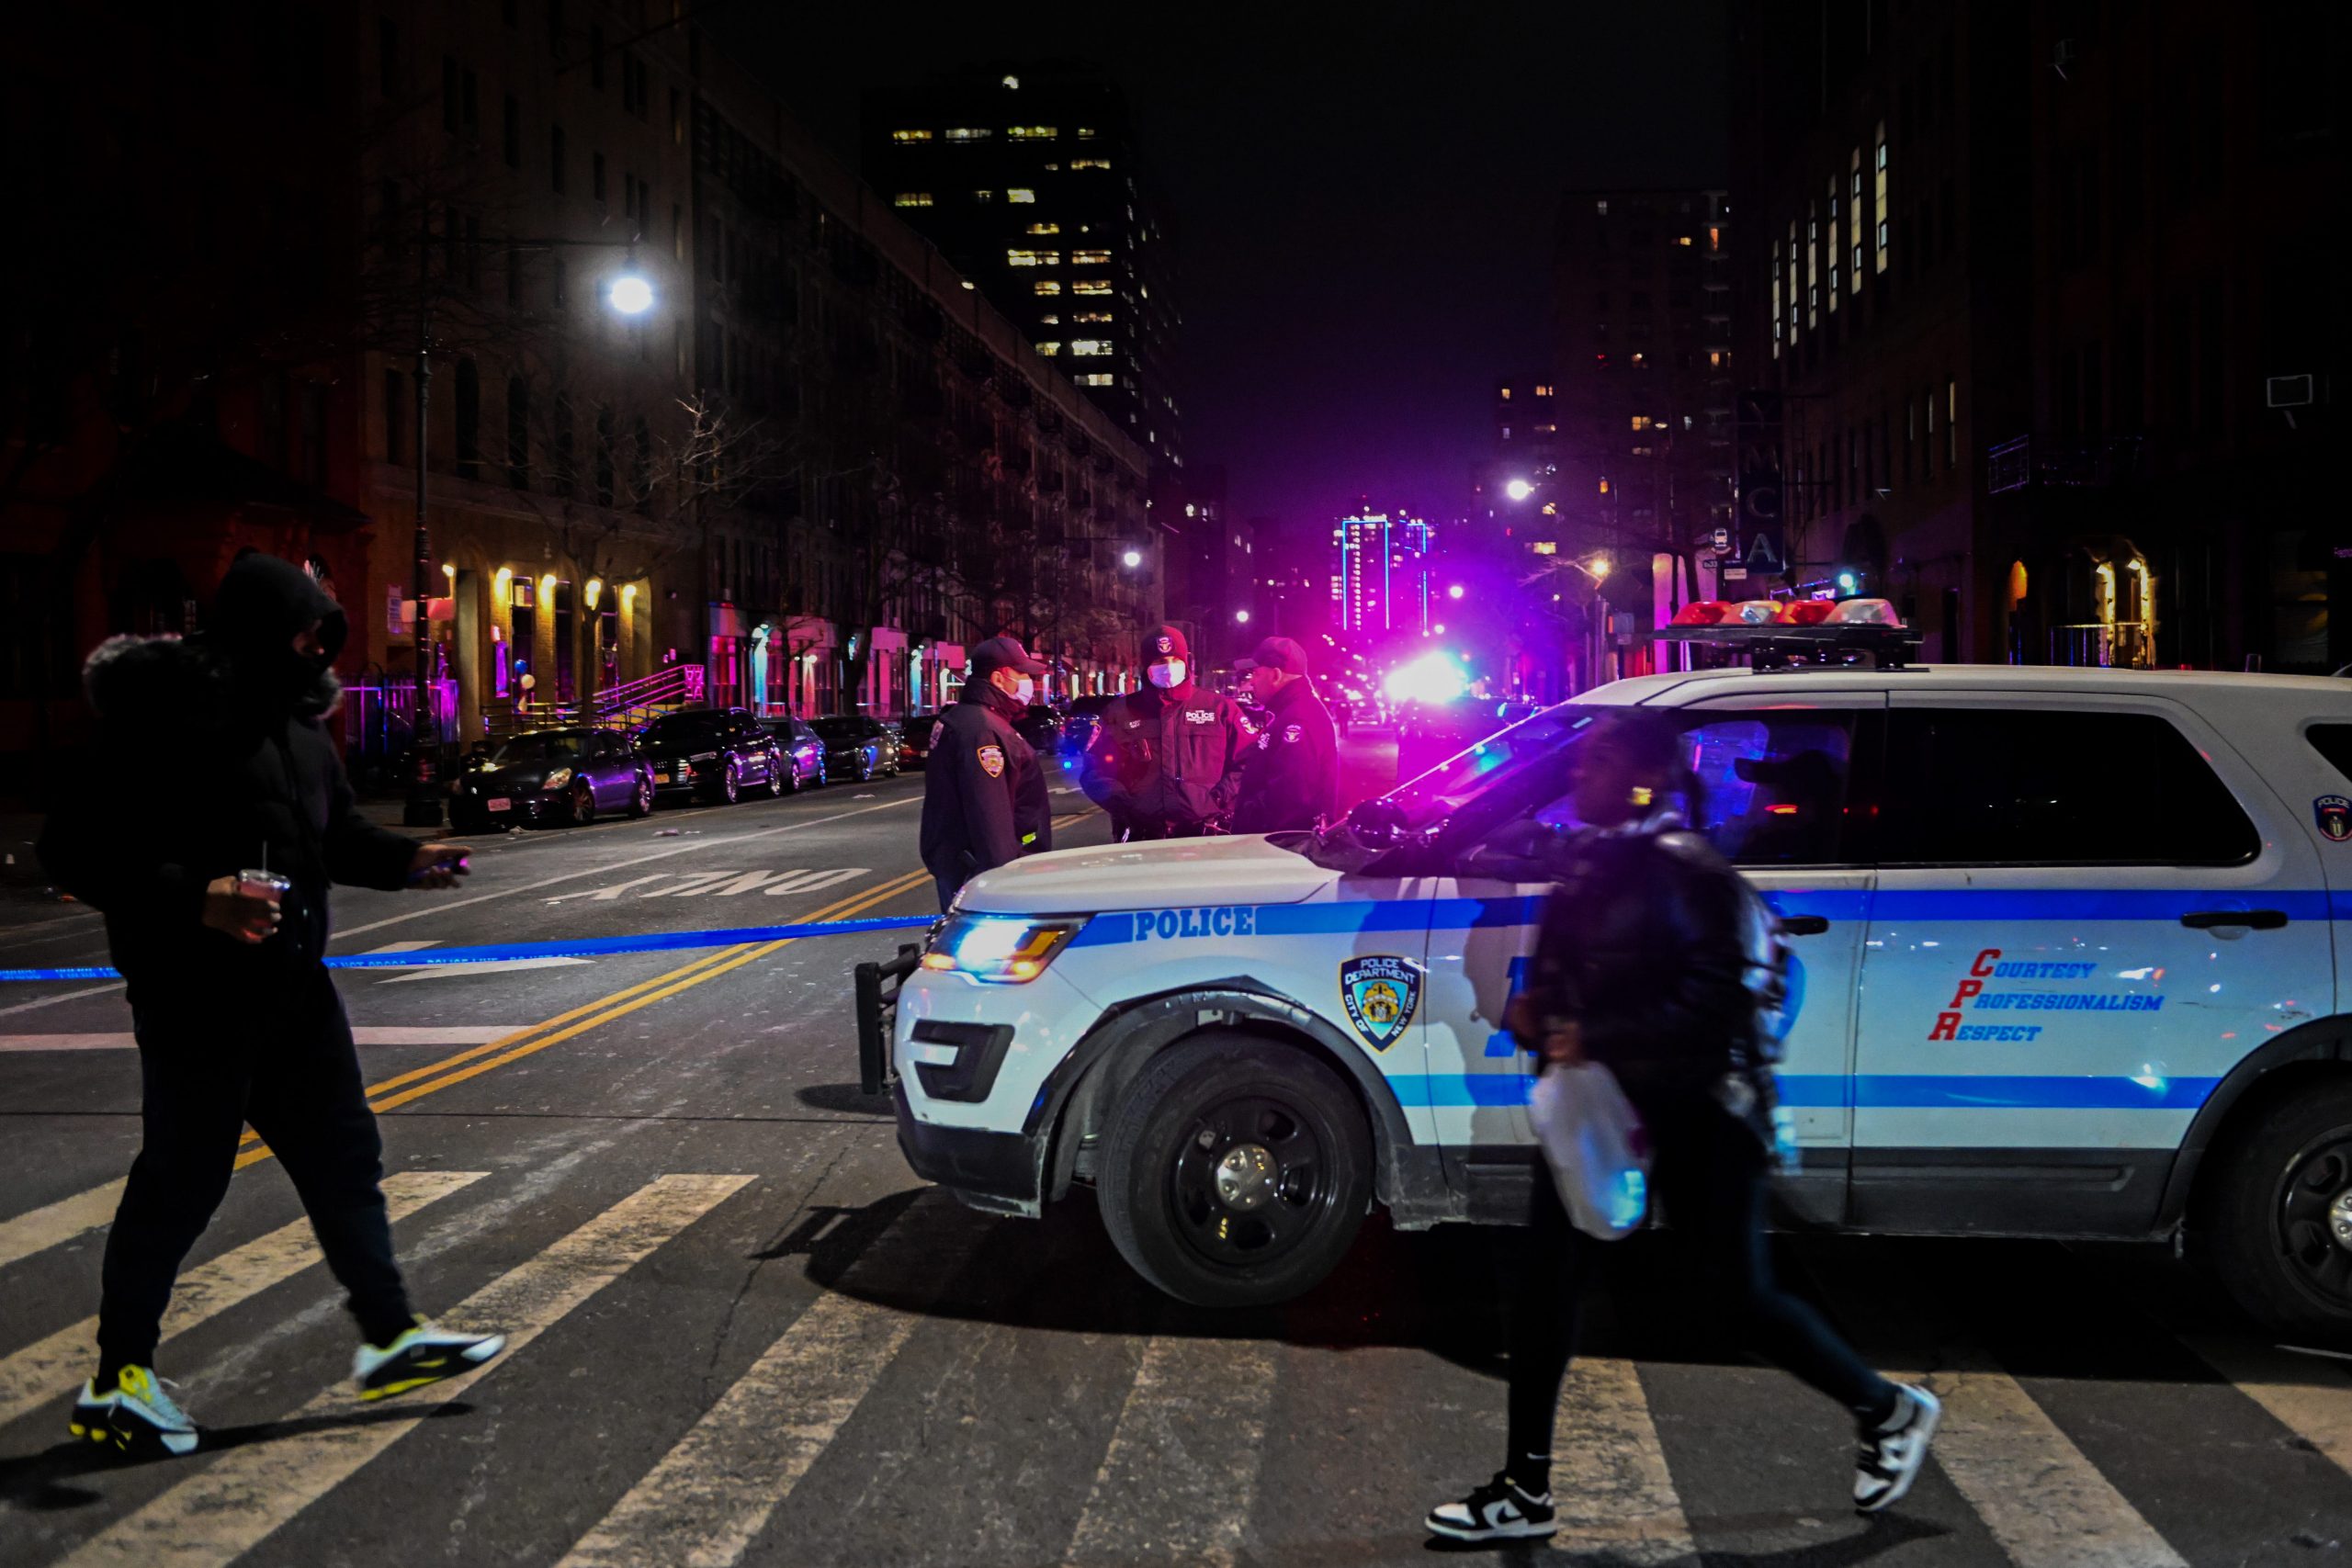 Police officers lock down the scene after two NYPD officers were shot in Harlem on January 21, 2022 in New York City.